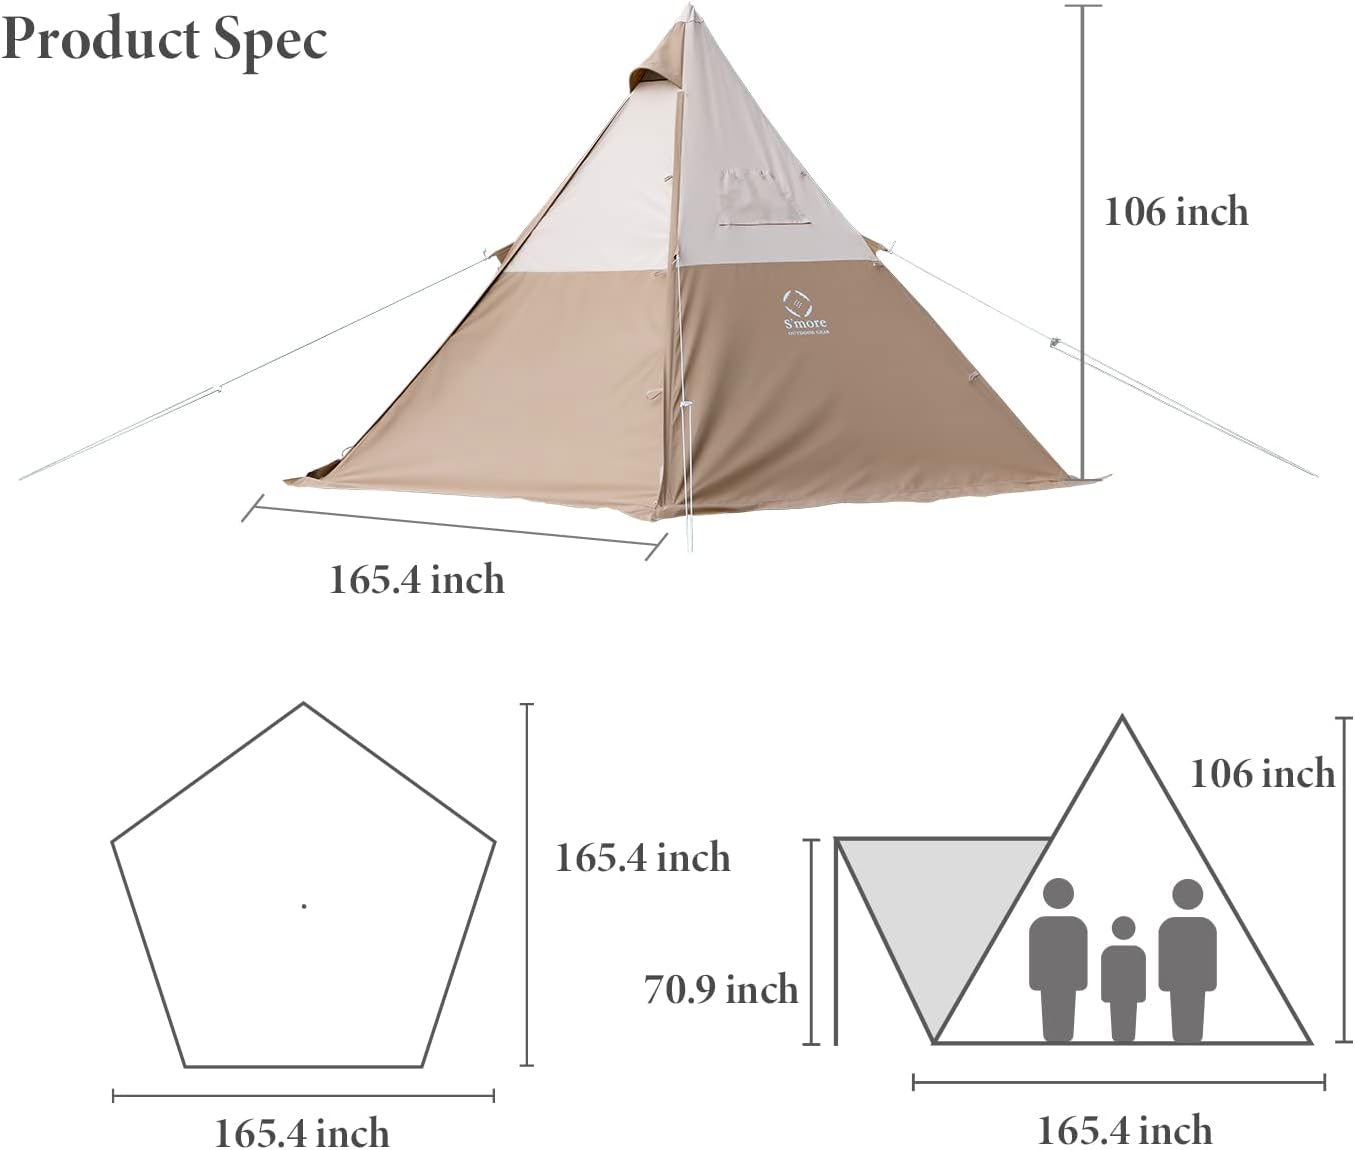 Smore Pyramid Tent For 4 Person Size